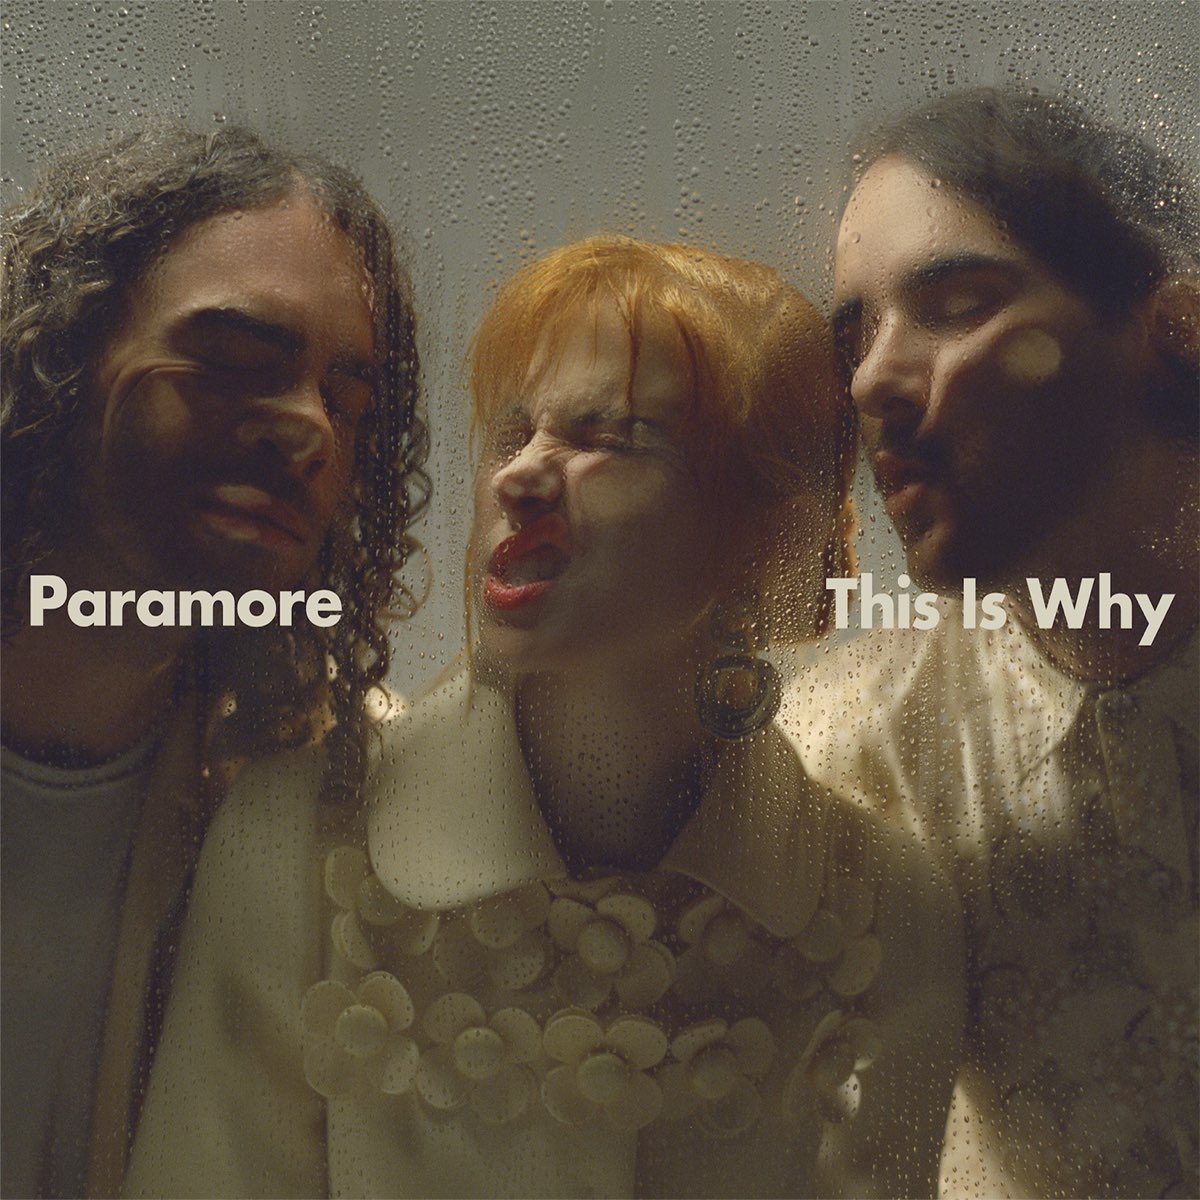 1200x1200bf 60 This Is Why by Paramore